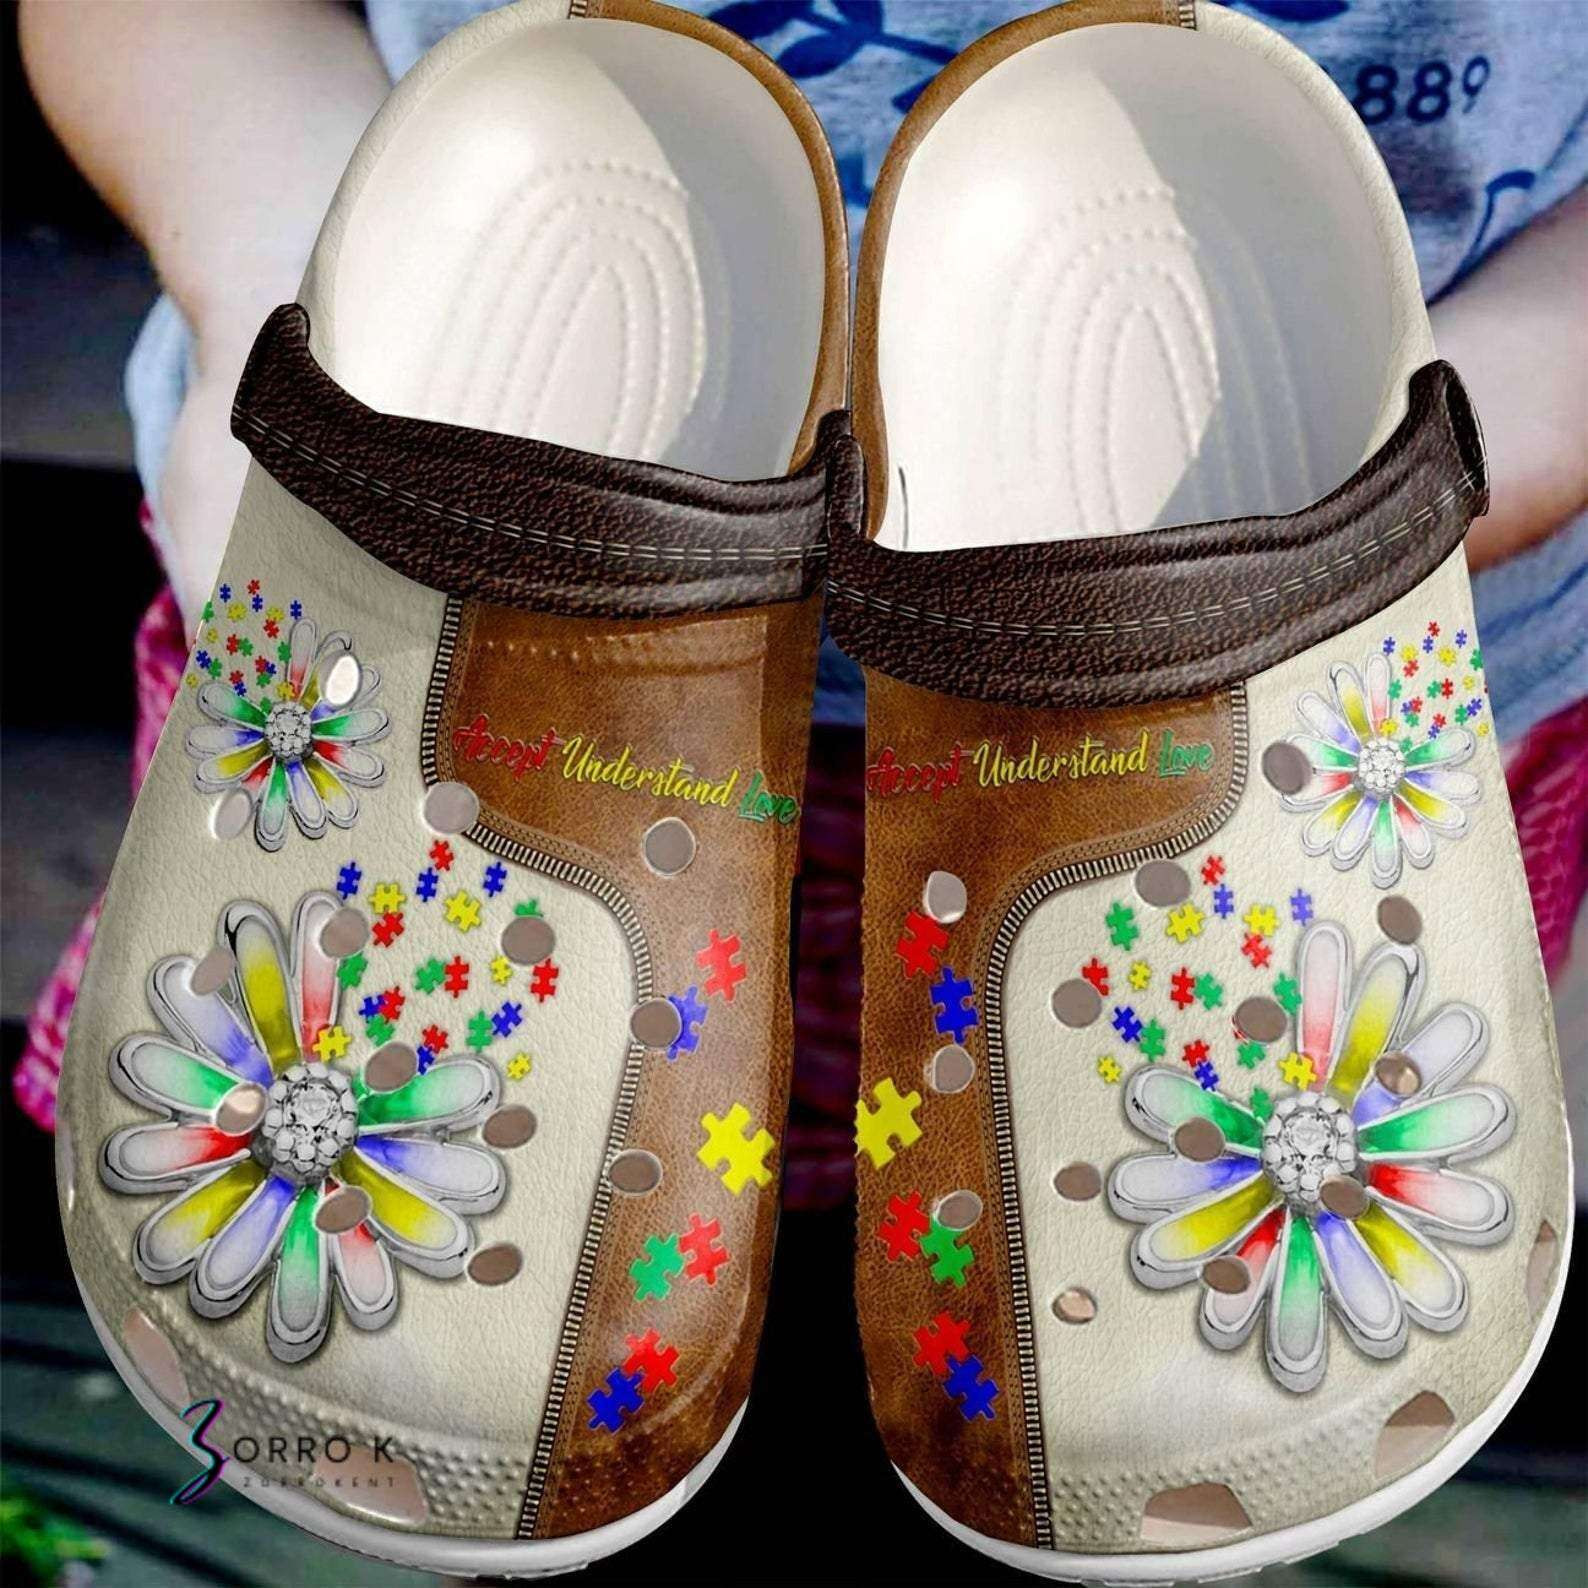 Autism Awareness Day Daisy Flower Accept Understand Love Puzzle Pieces Crocs Crocband Clog Shoes